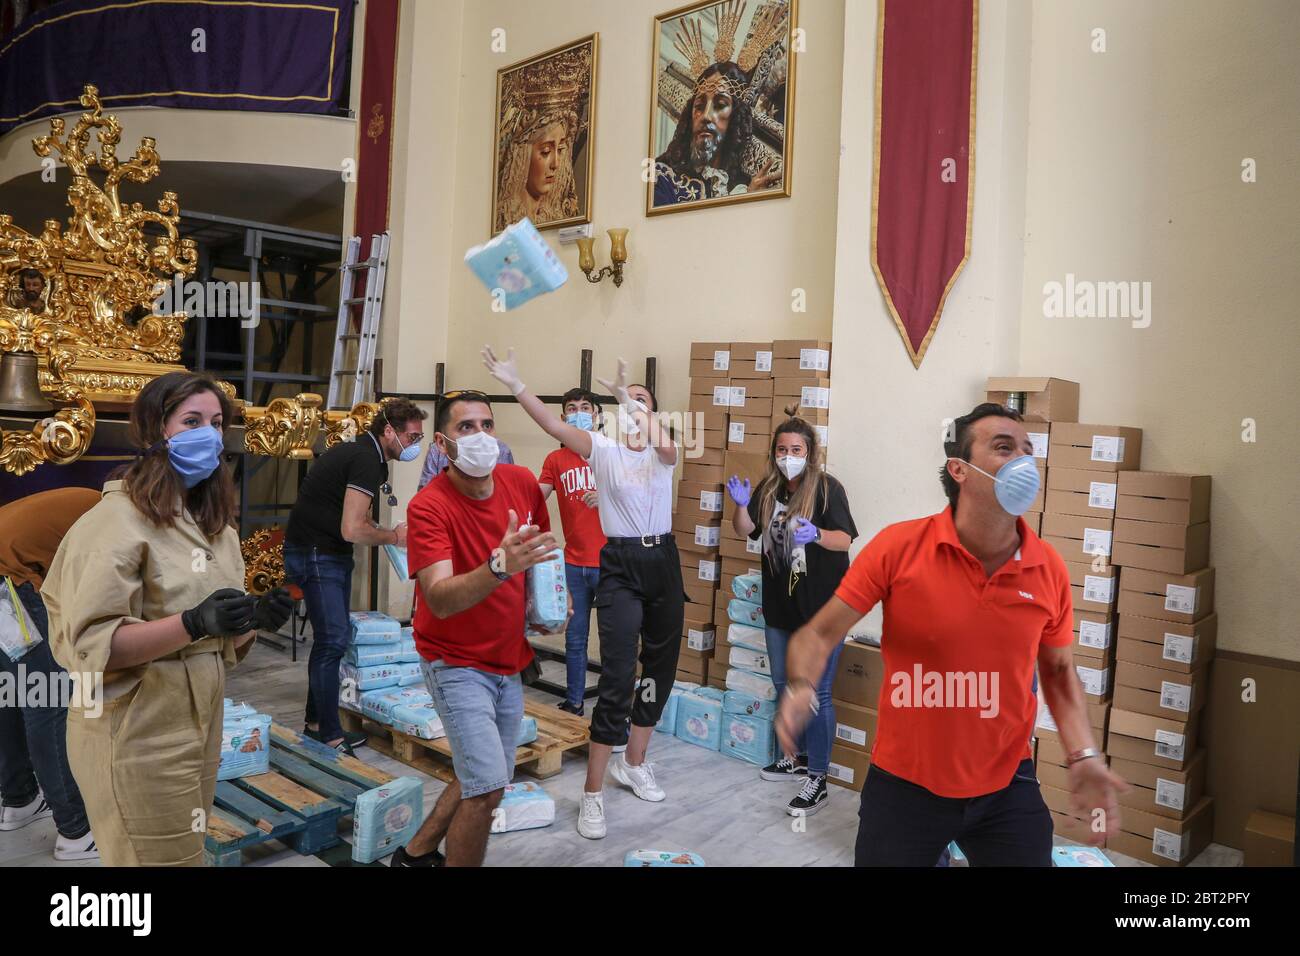 May 22, 2020: Malaga, Spain: La cofradia del Rico has raised money with its brothers for a solidarity initiative for the donation of 30,000 diapers for families in need of the coronavirus crisis Credit: Lorenzo Carnero/ZUMA Wire/Alamy Live News Stock Photo